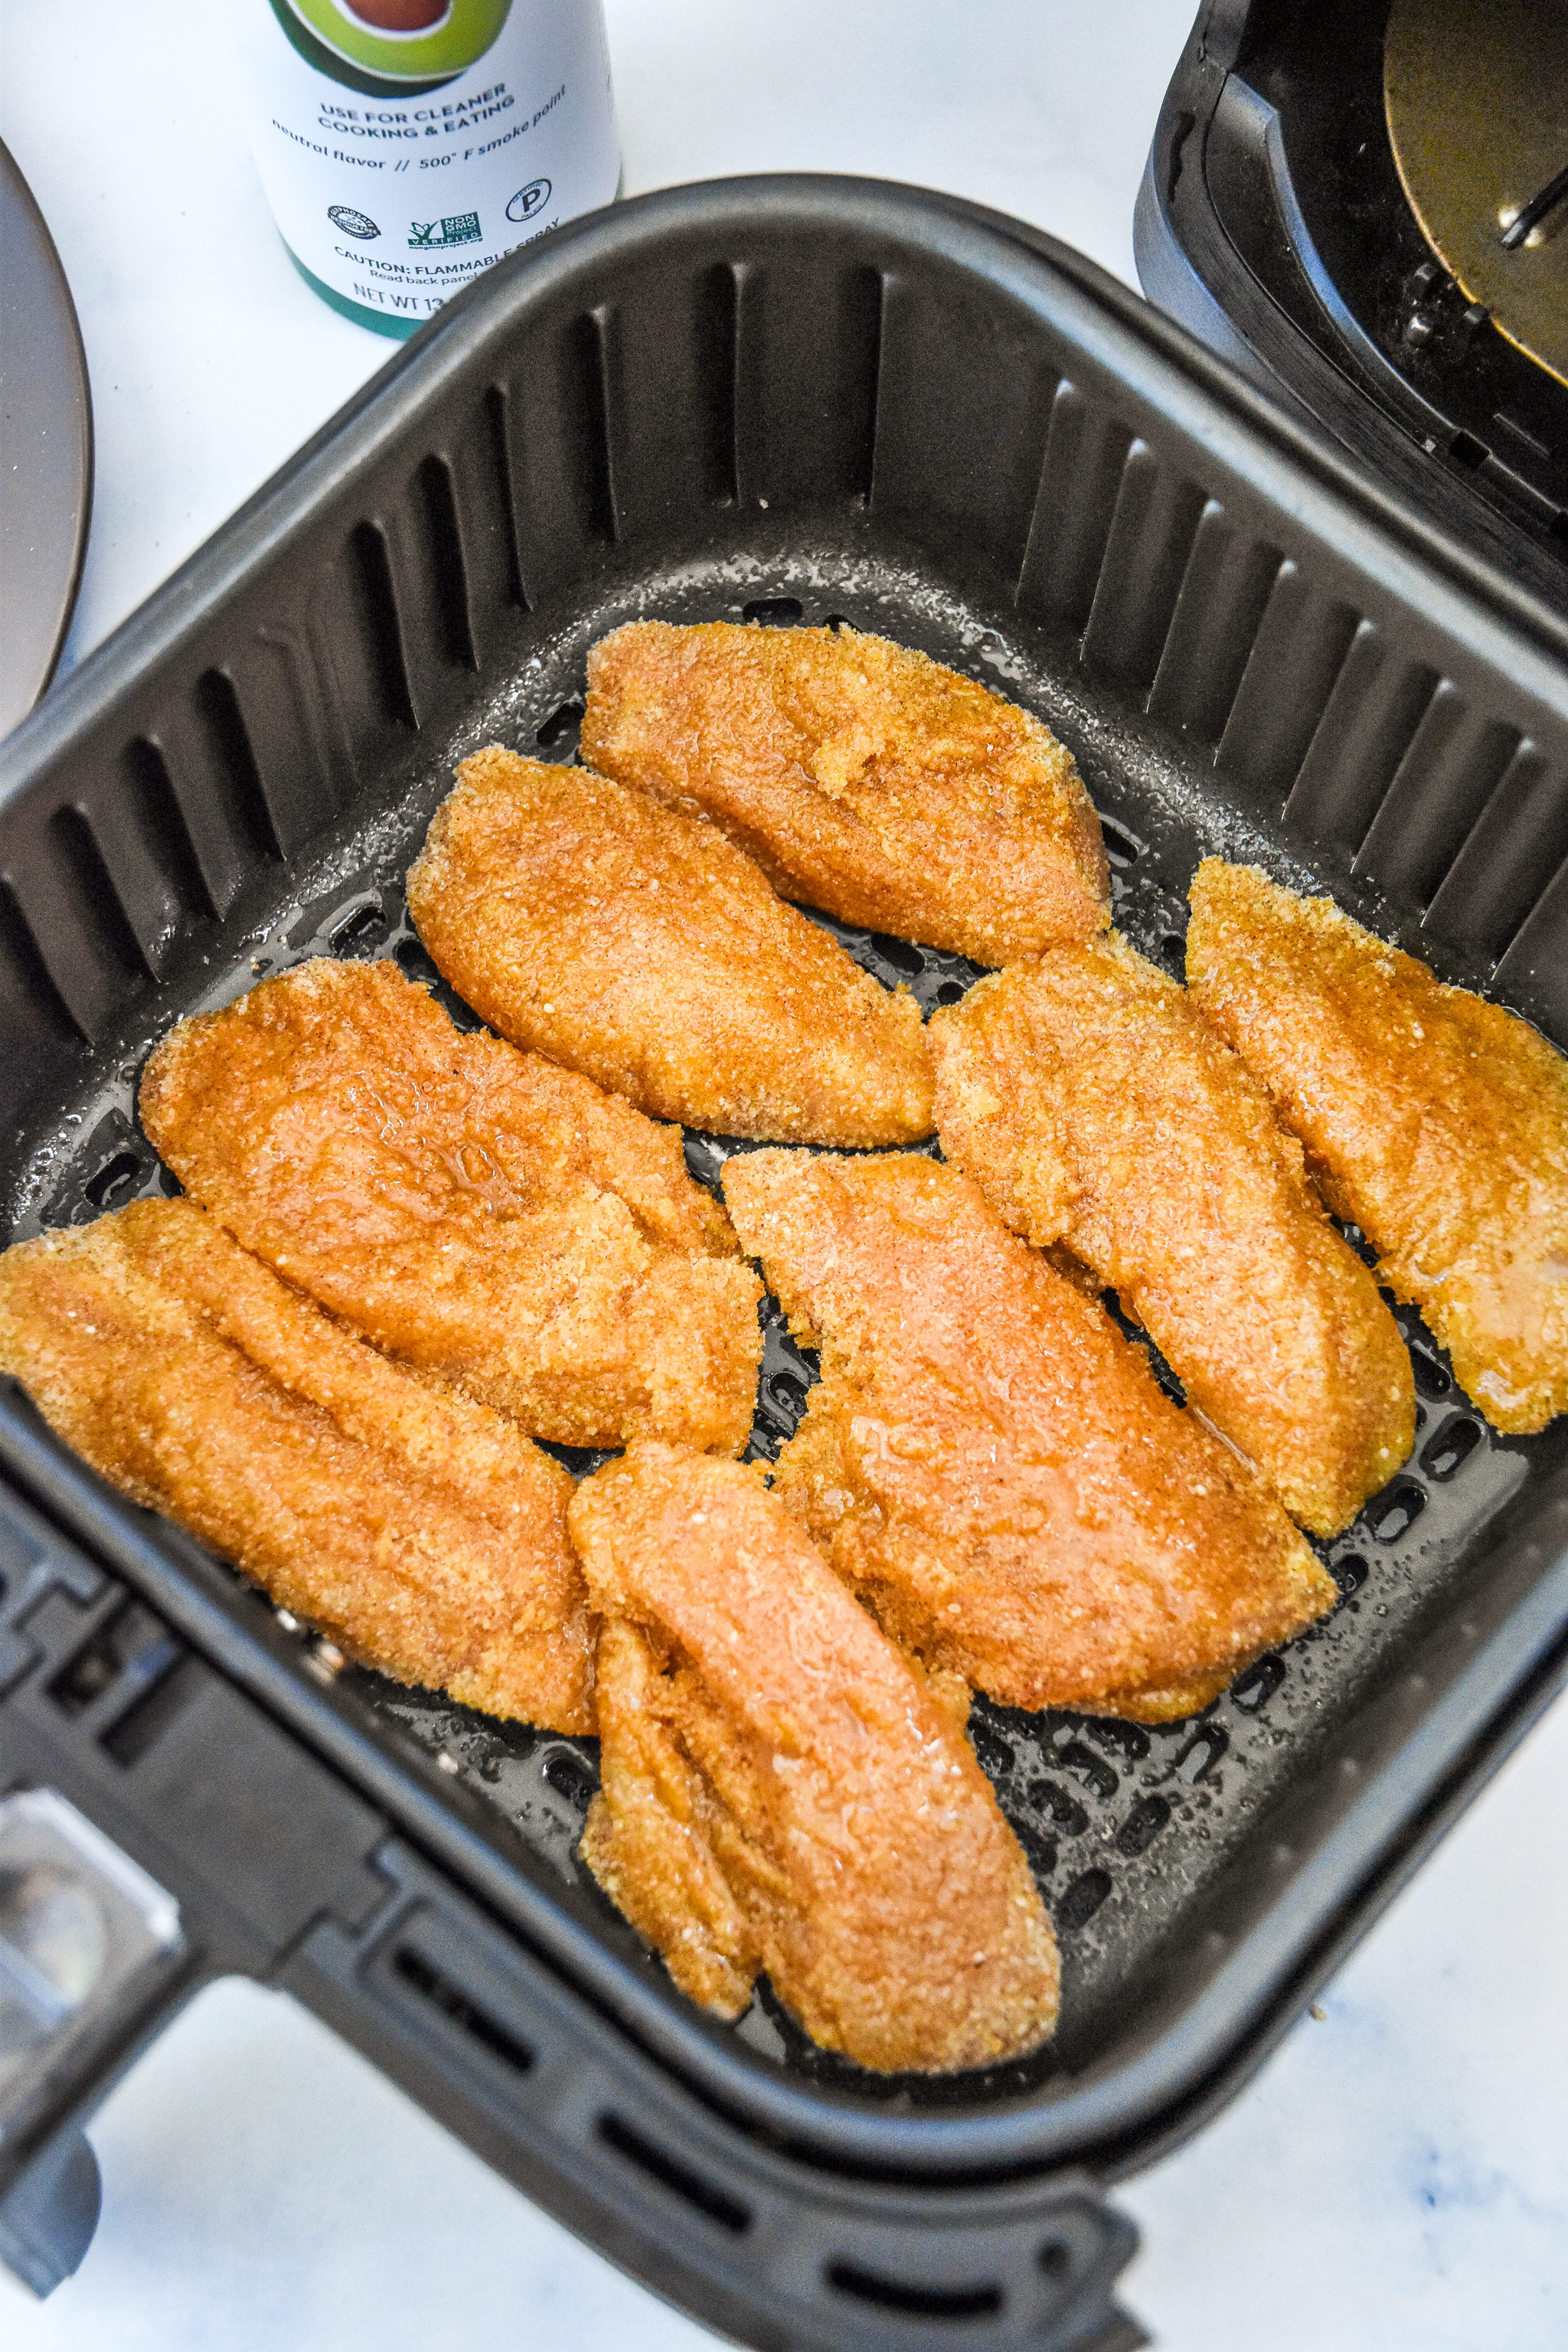 the chicken tenders after spraying with avocado oil spray.